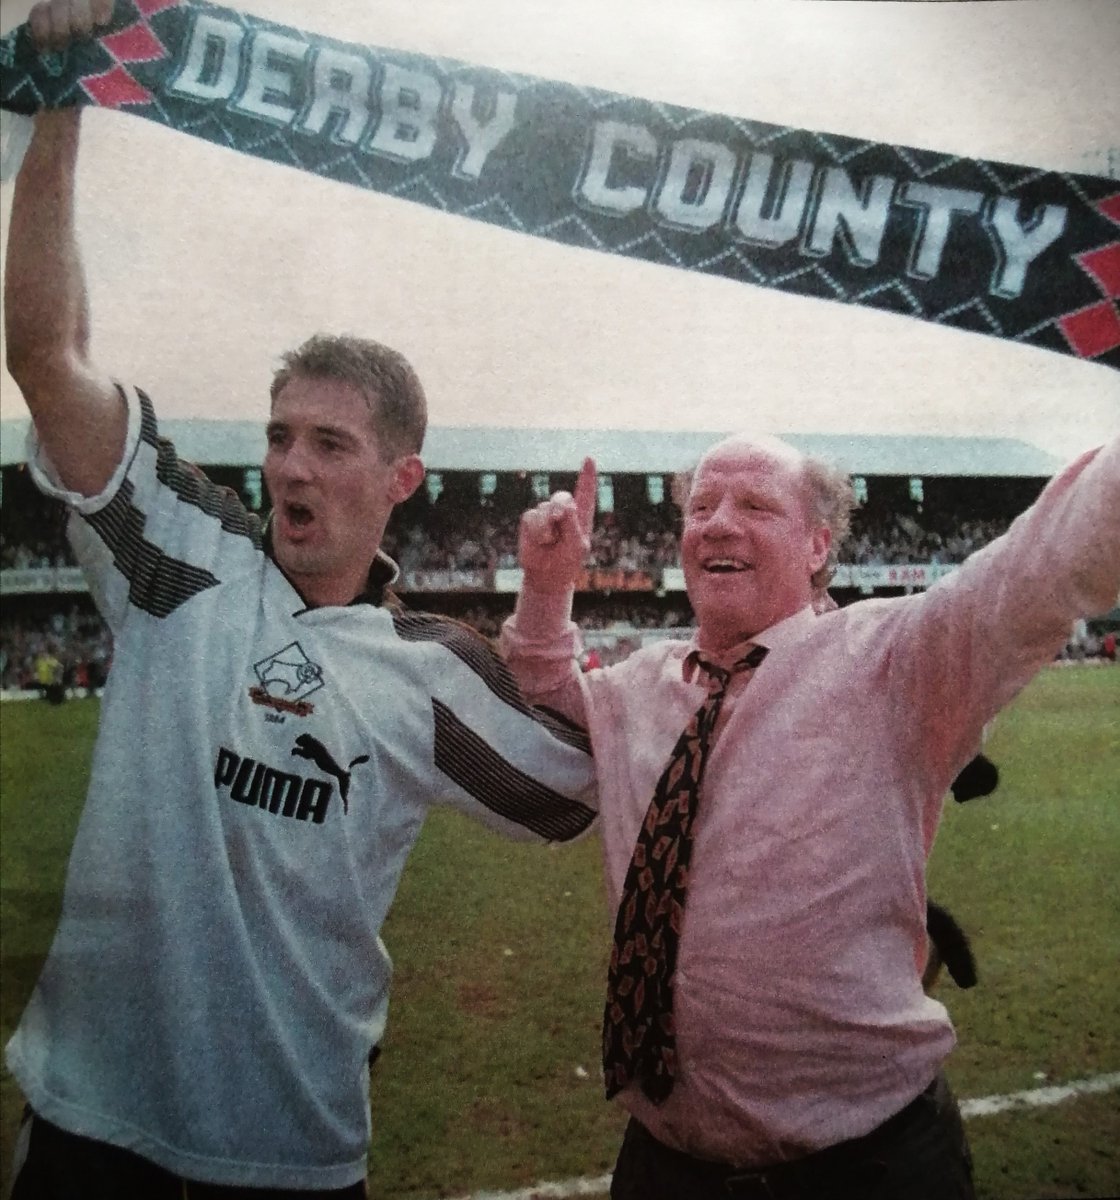 This week in 1996... 

Igor Stimac, Jim Smith and Derby County joined the elite and were promoted to the Premiership.
The Rams would enjoy a six-year stay in the top flight before relegation in 2002.